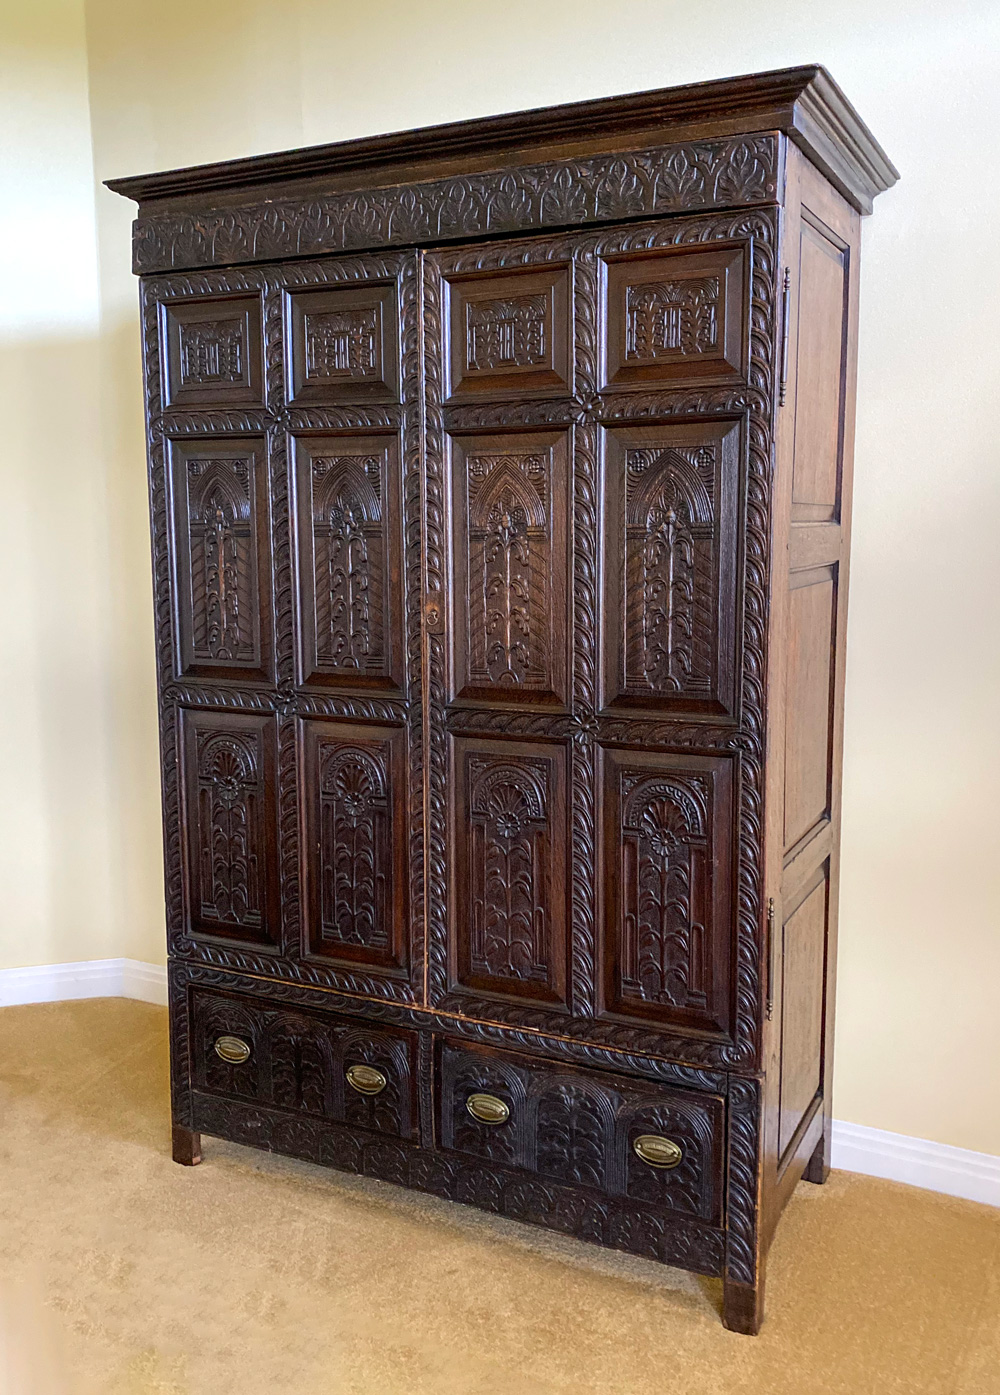 EARLY CARVED OAK ARMOIRE: Large